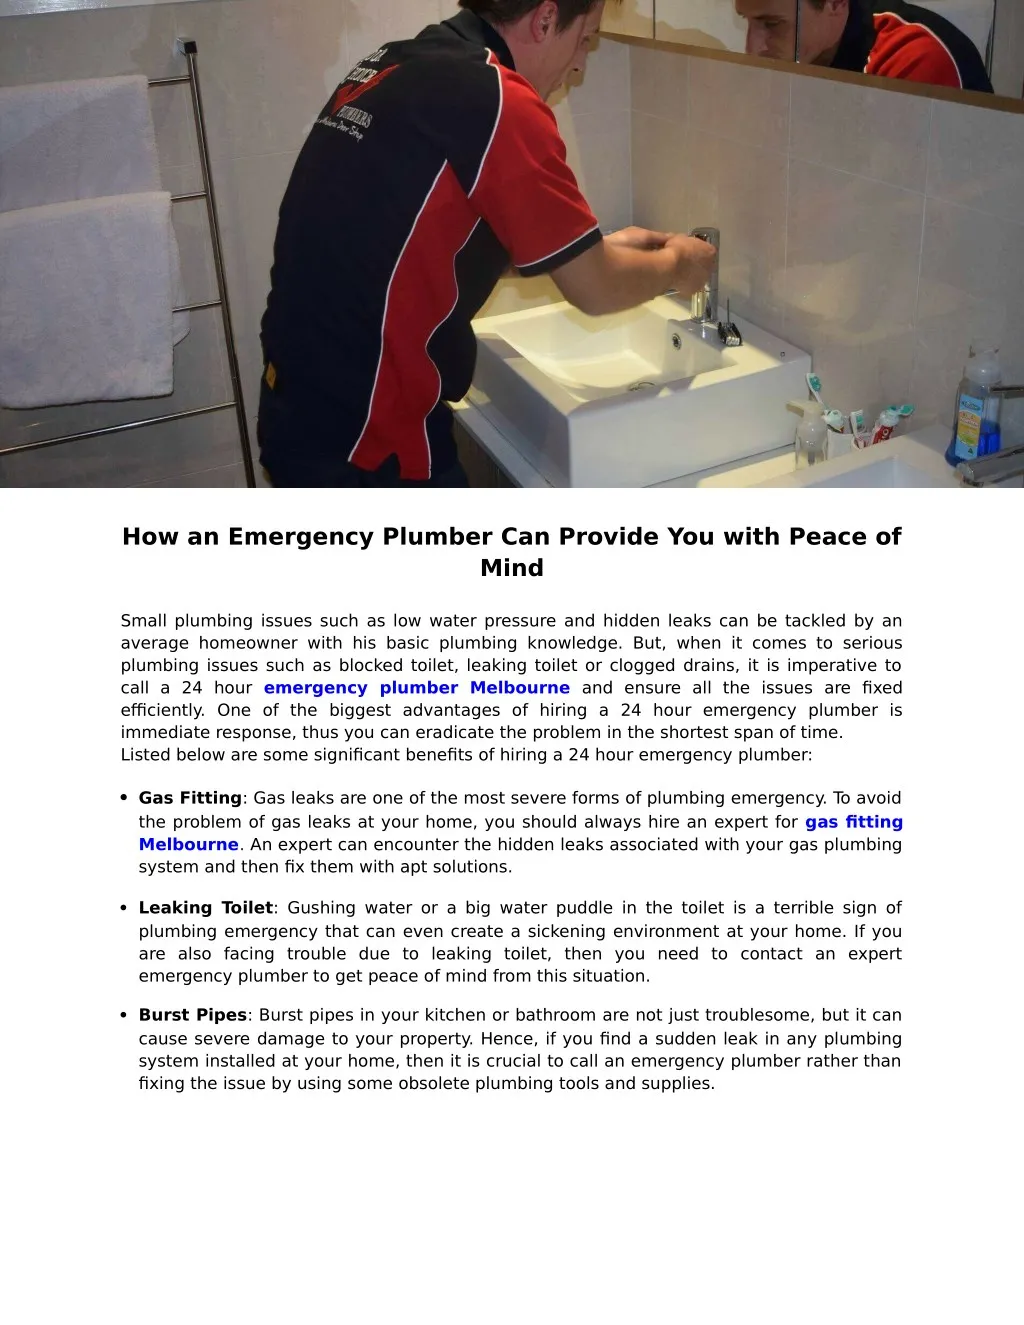 how an emergency plumber can provide you with